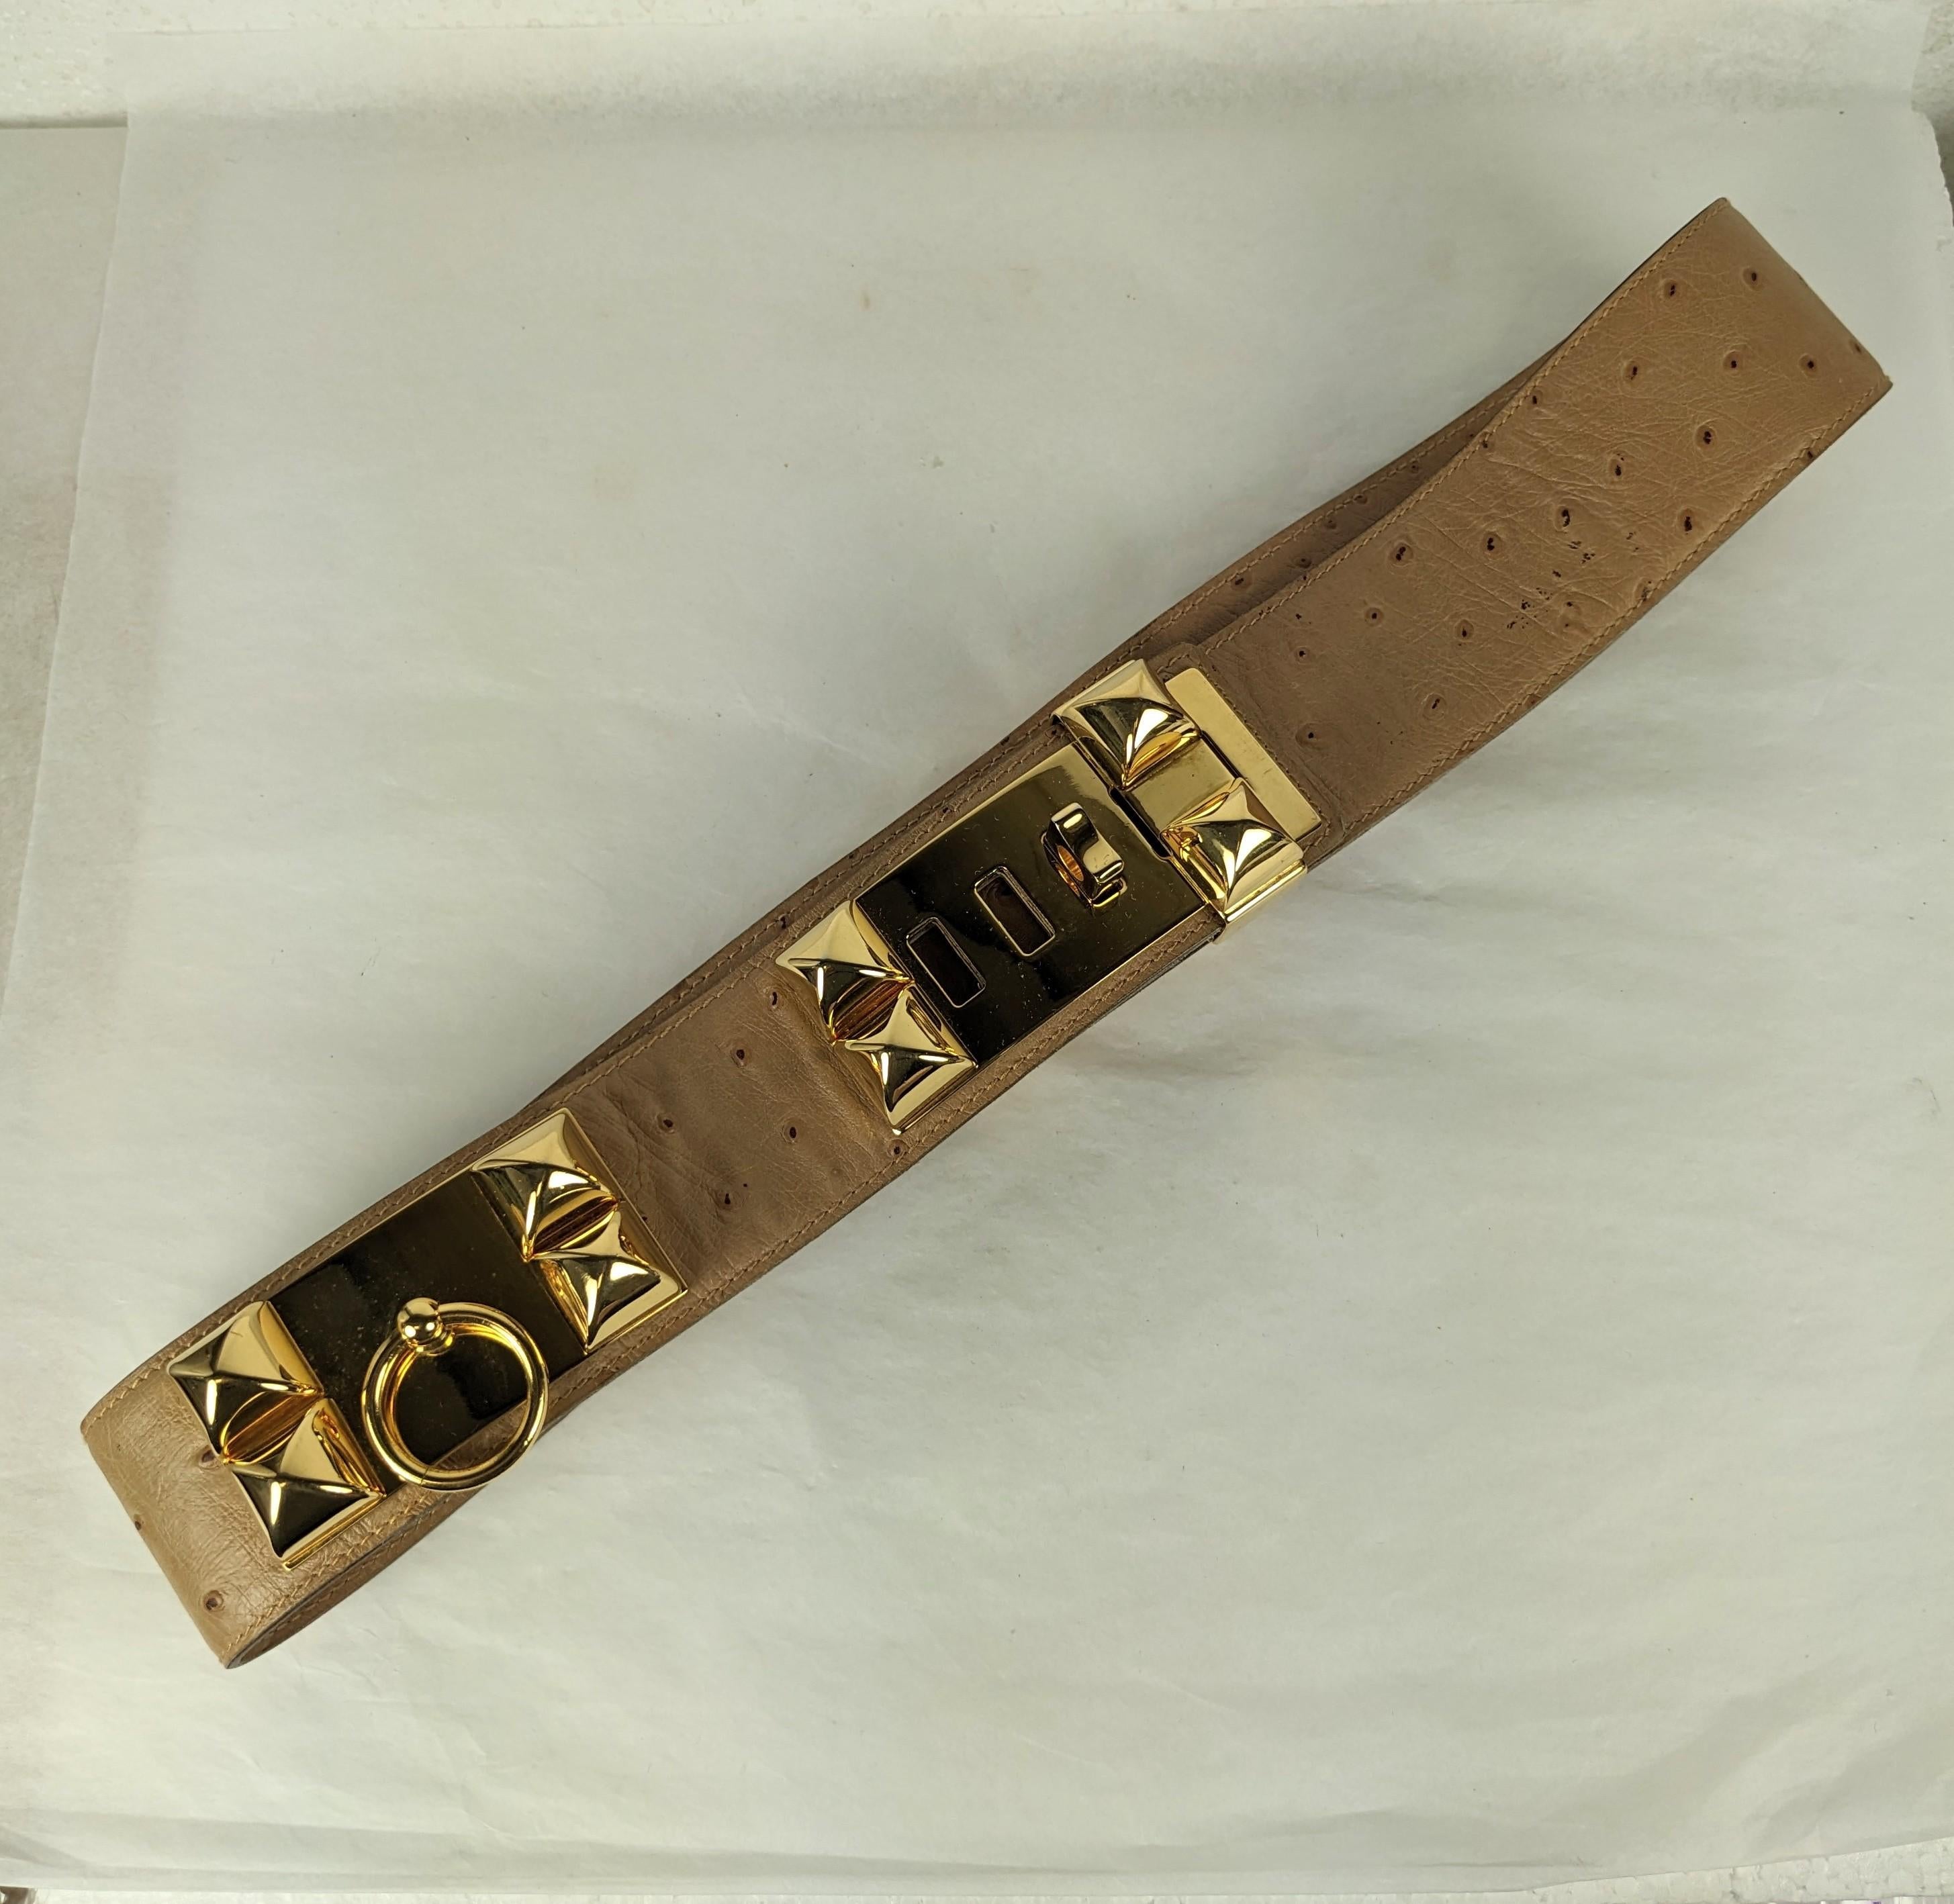 Authentic, elegant Hermes Collier de Chien Ostrich Belt from the 1980's. Exotic ostrich skin with polished gold palladium belt buckle accented by studs.
Total Length 35